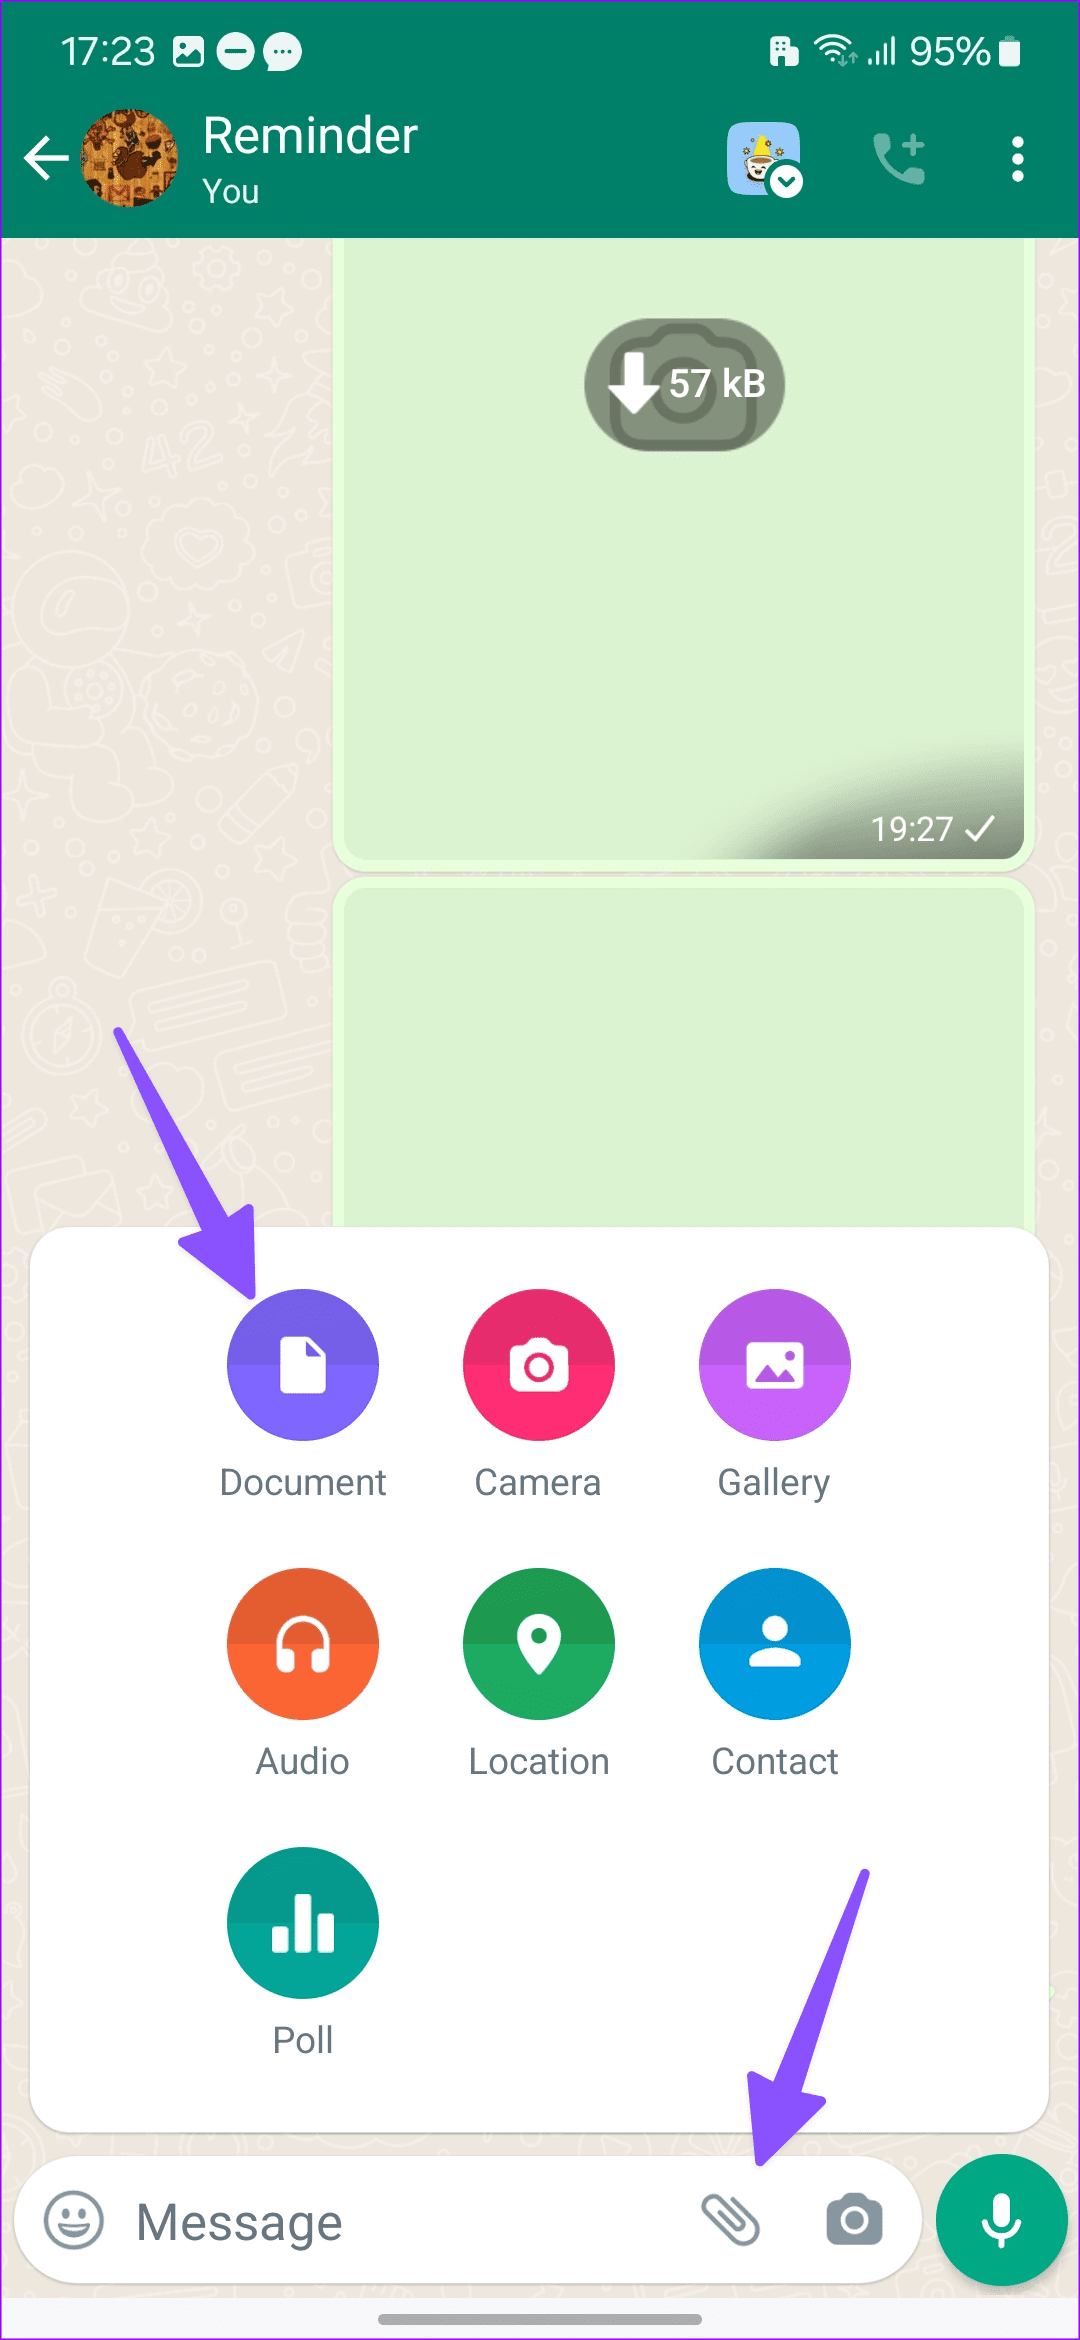 Click Paperclip Icon for Attachments and Select Document on Android WhatsApp